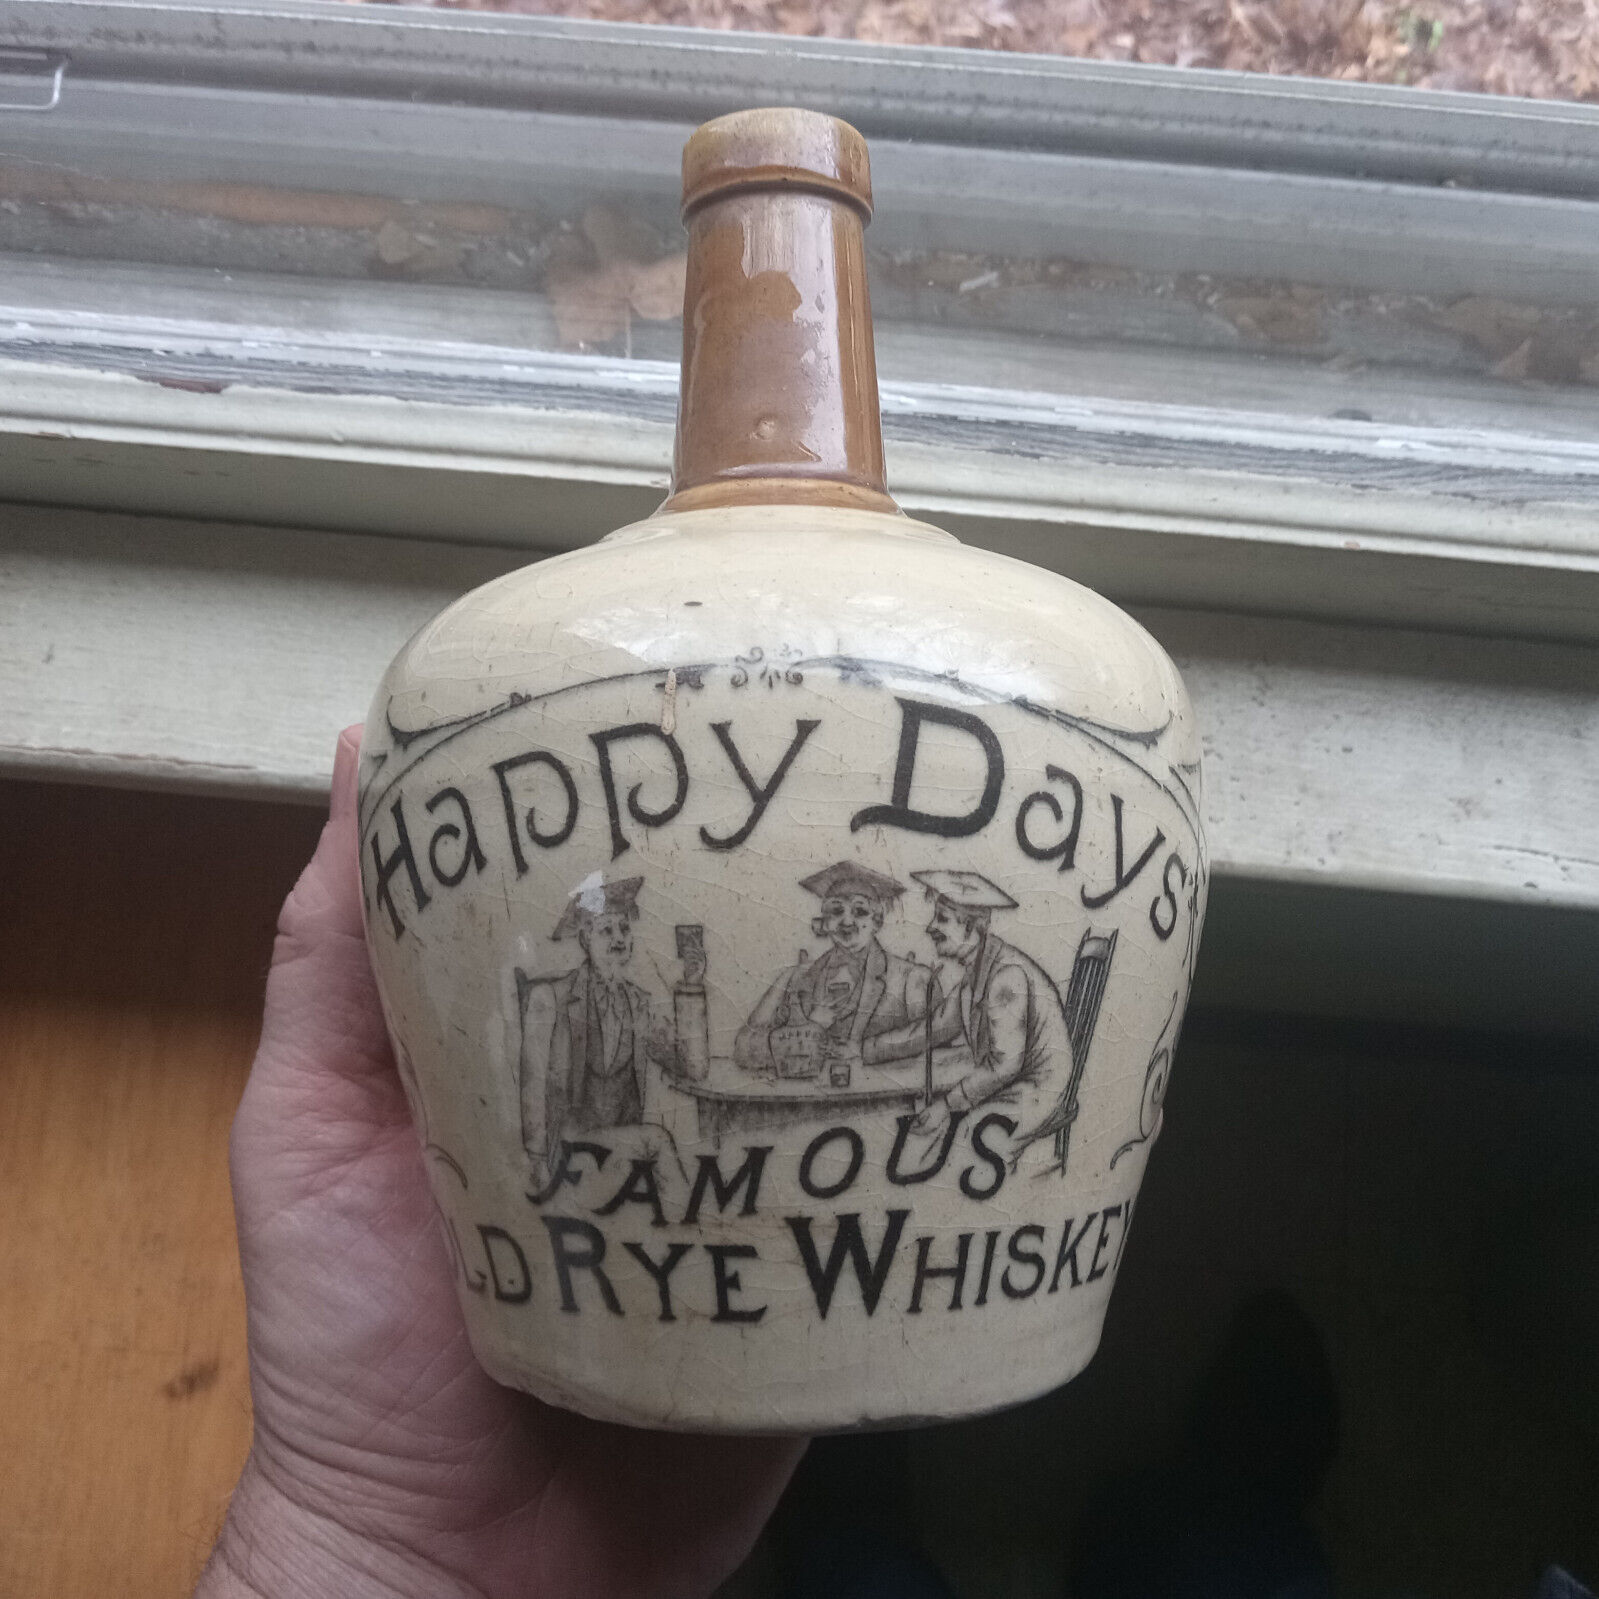 HAPPY DAYS FAMOUS OLD RYE WHISKEY 3 COLLEGE GRADS 1890 PRE PRO STONEWARE JUG